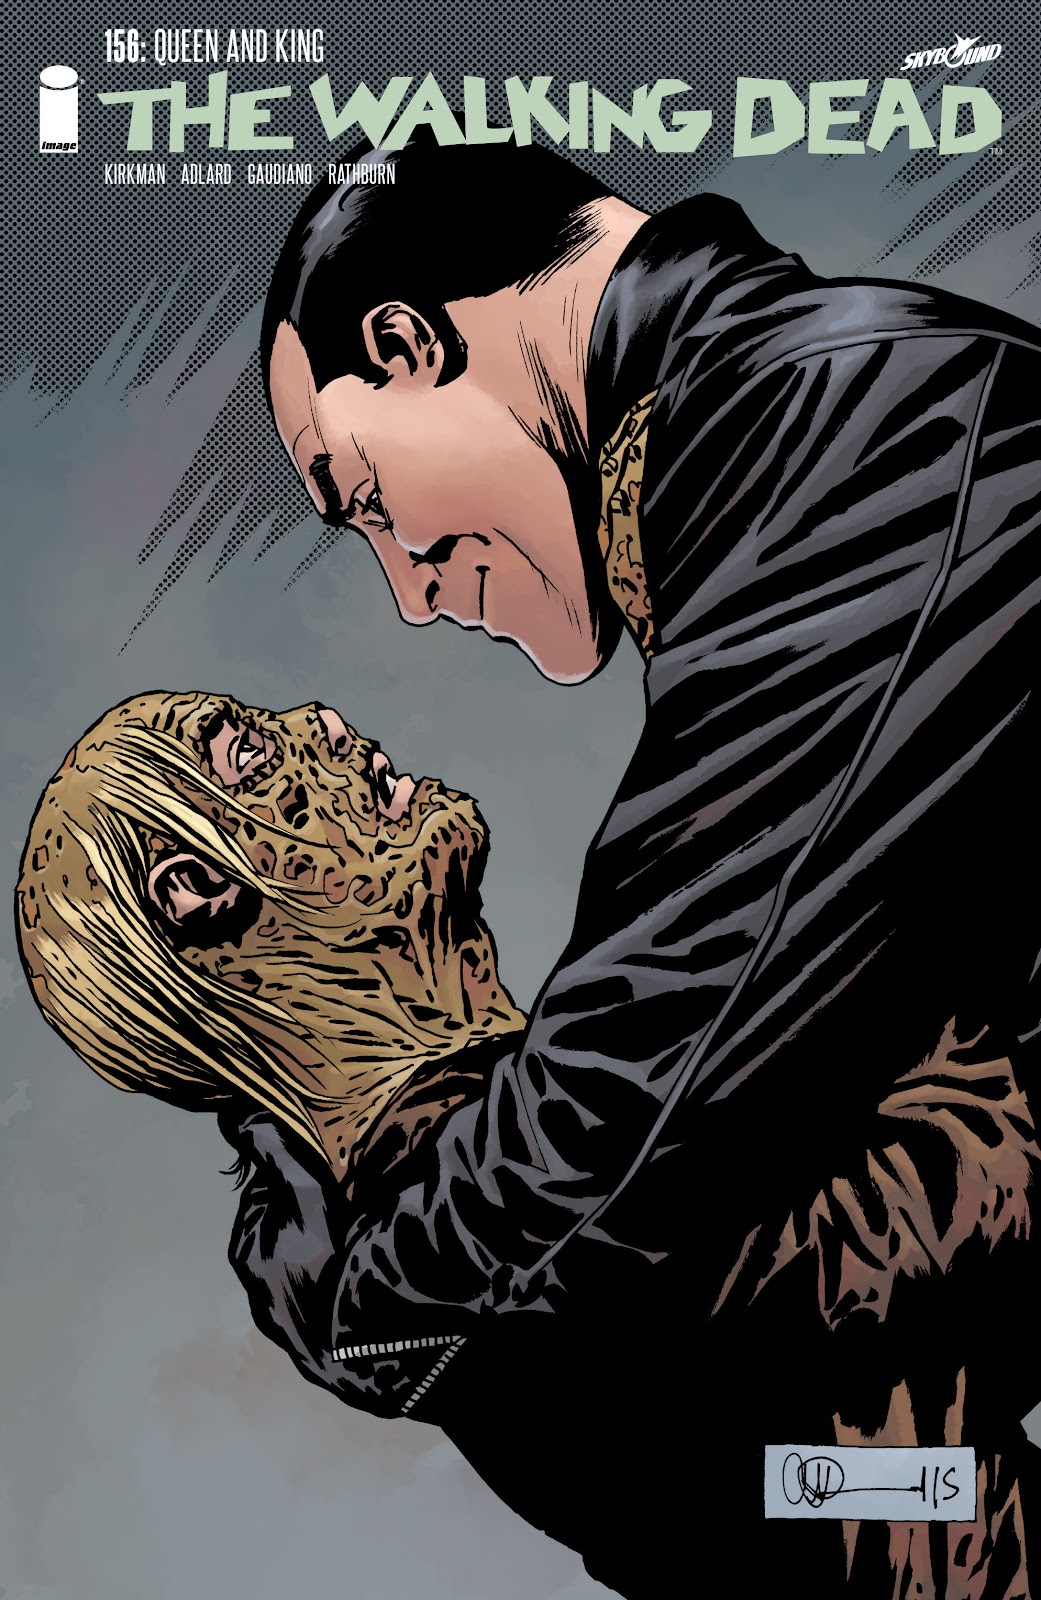 The Walking Dead 156 Page 1